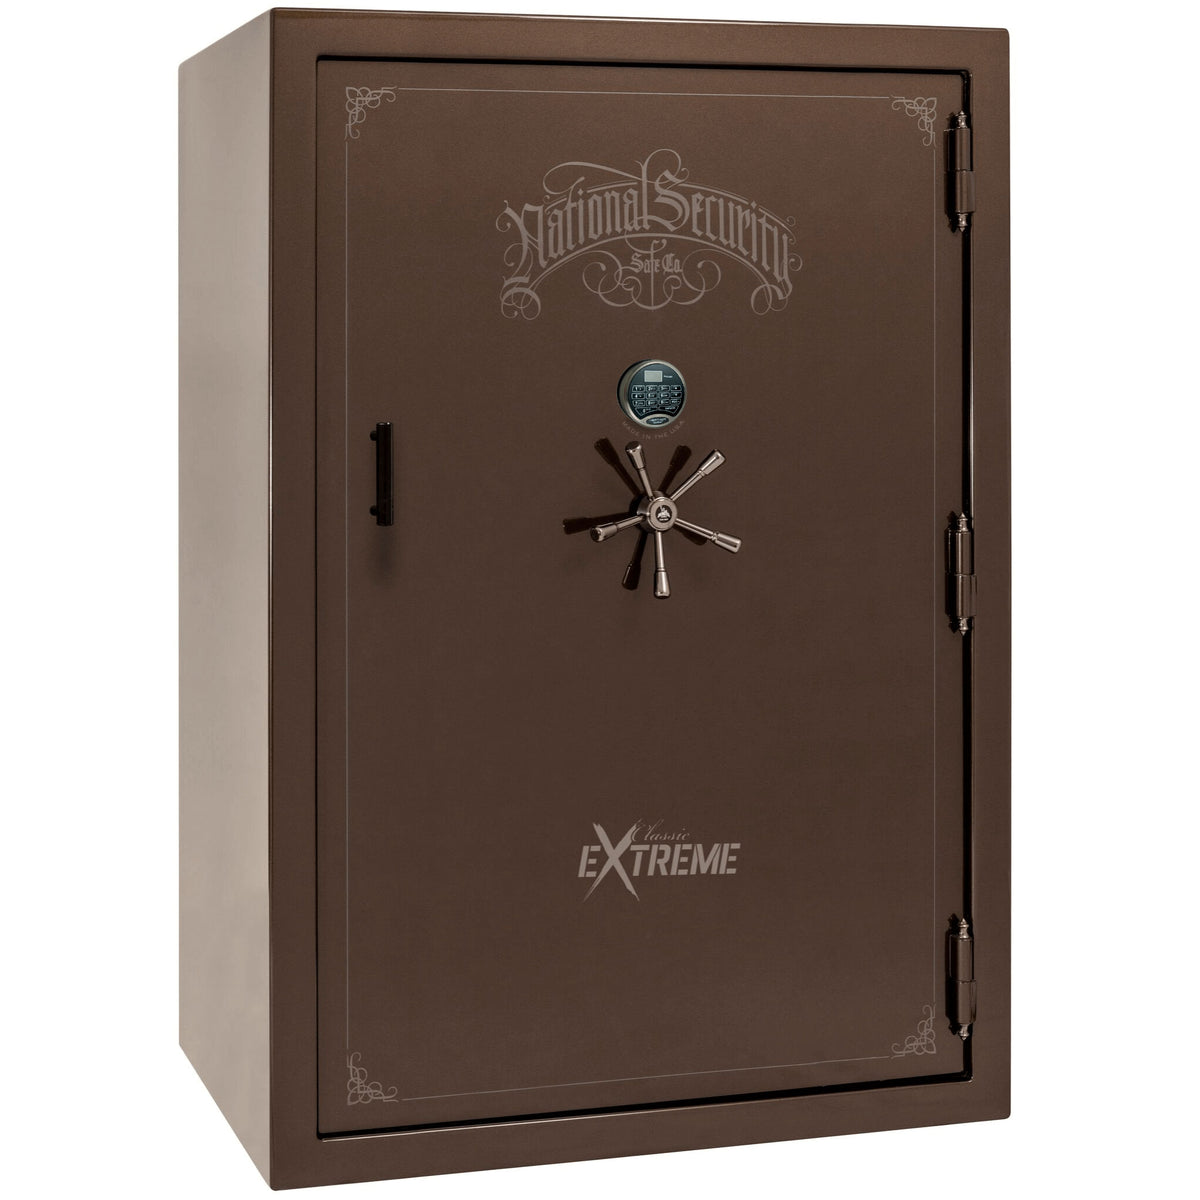 Liberty Classic Select Extreme Wide Body Safe in Bronze Gloss with Black Chrome Electronic Lock.